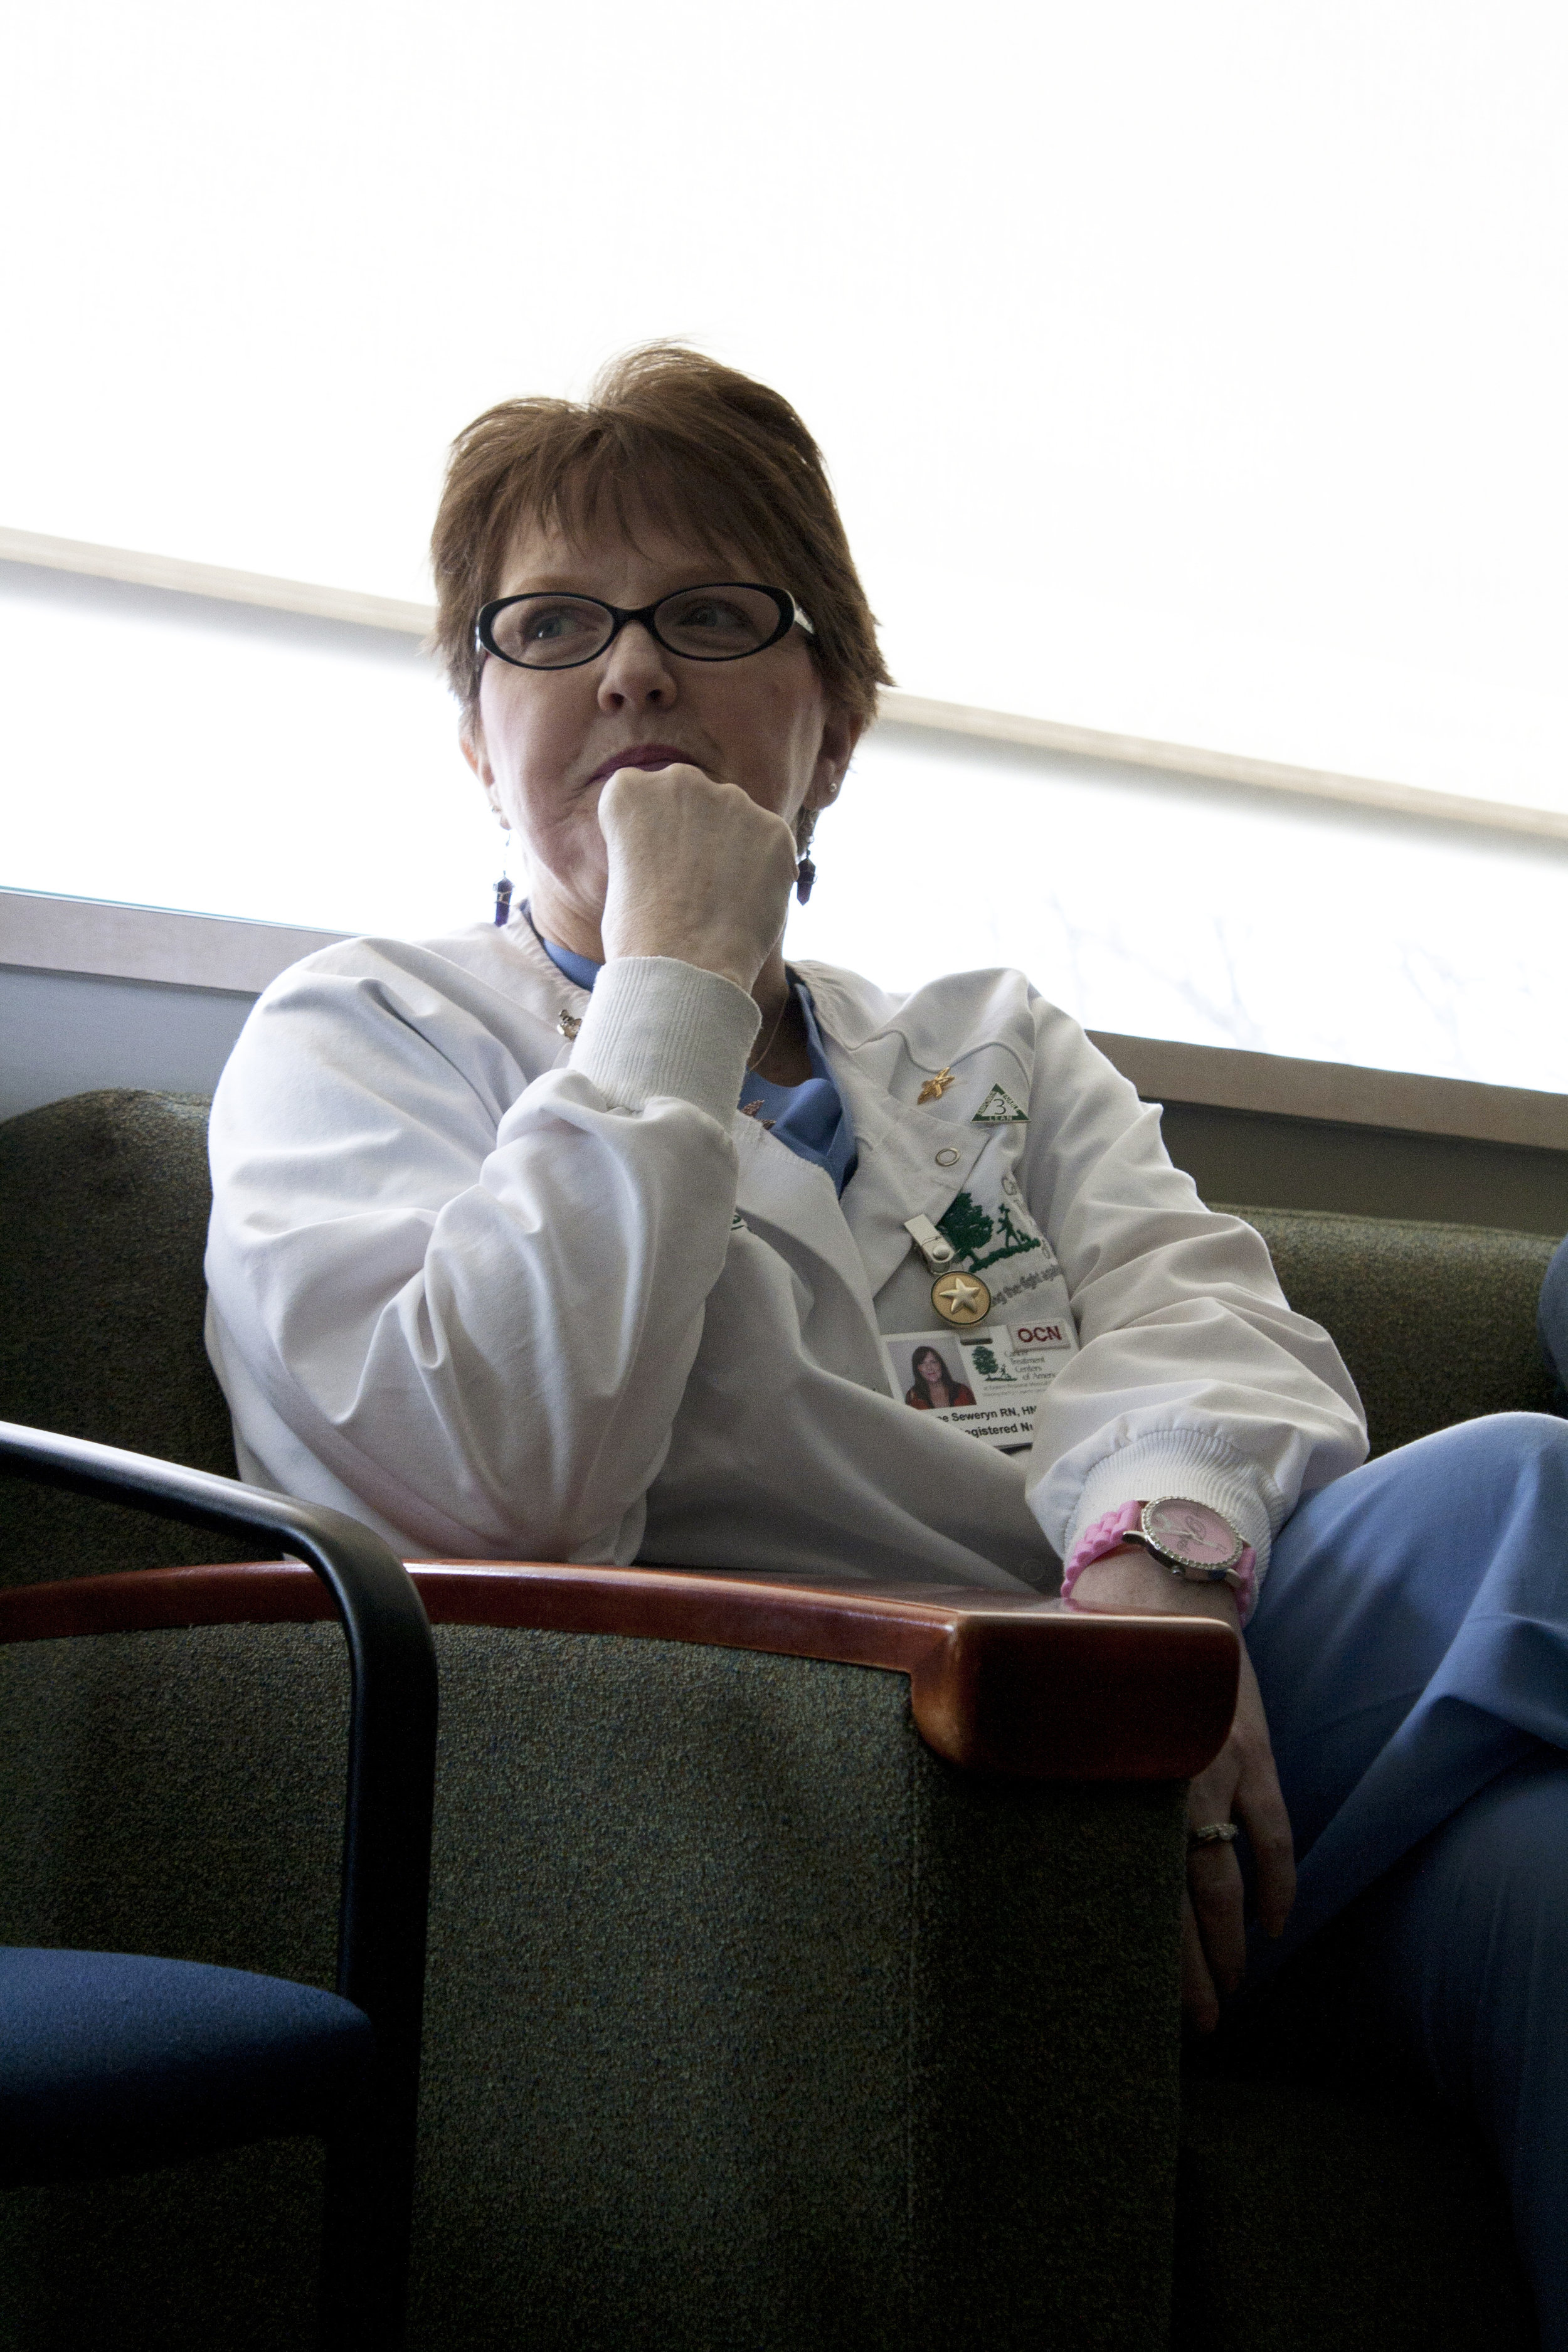 Alt text: a middle-aged white woman with short brown hair and oval, thick-rimmed glasses looks pensively off camera while sitting in a green chair. She’s wearing blue scrubs and a nurse’s lab coat wit